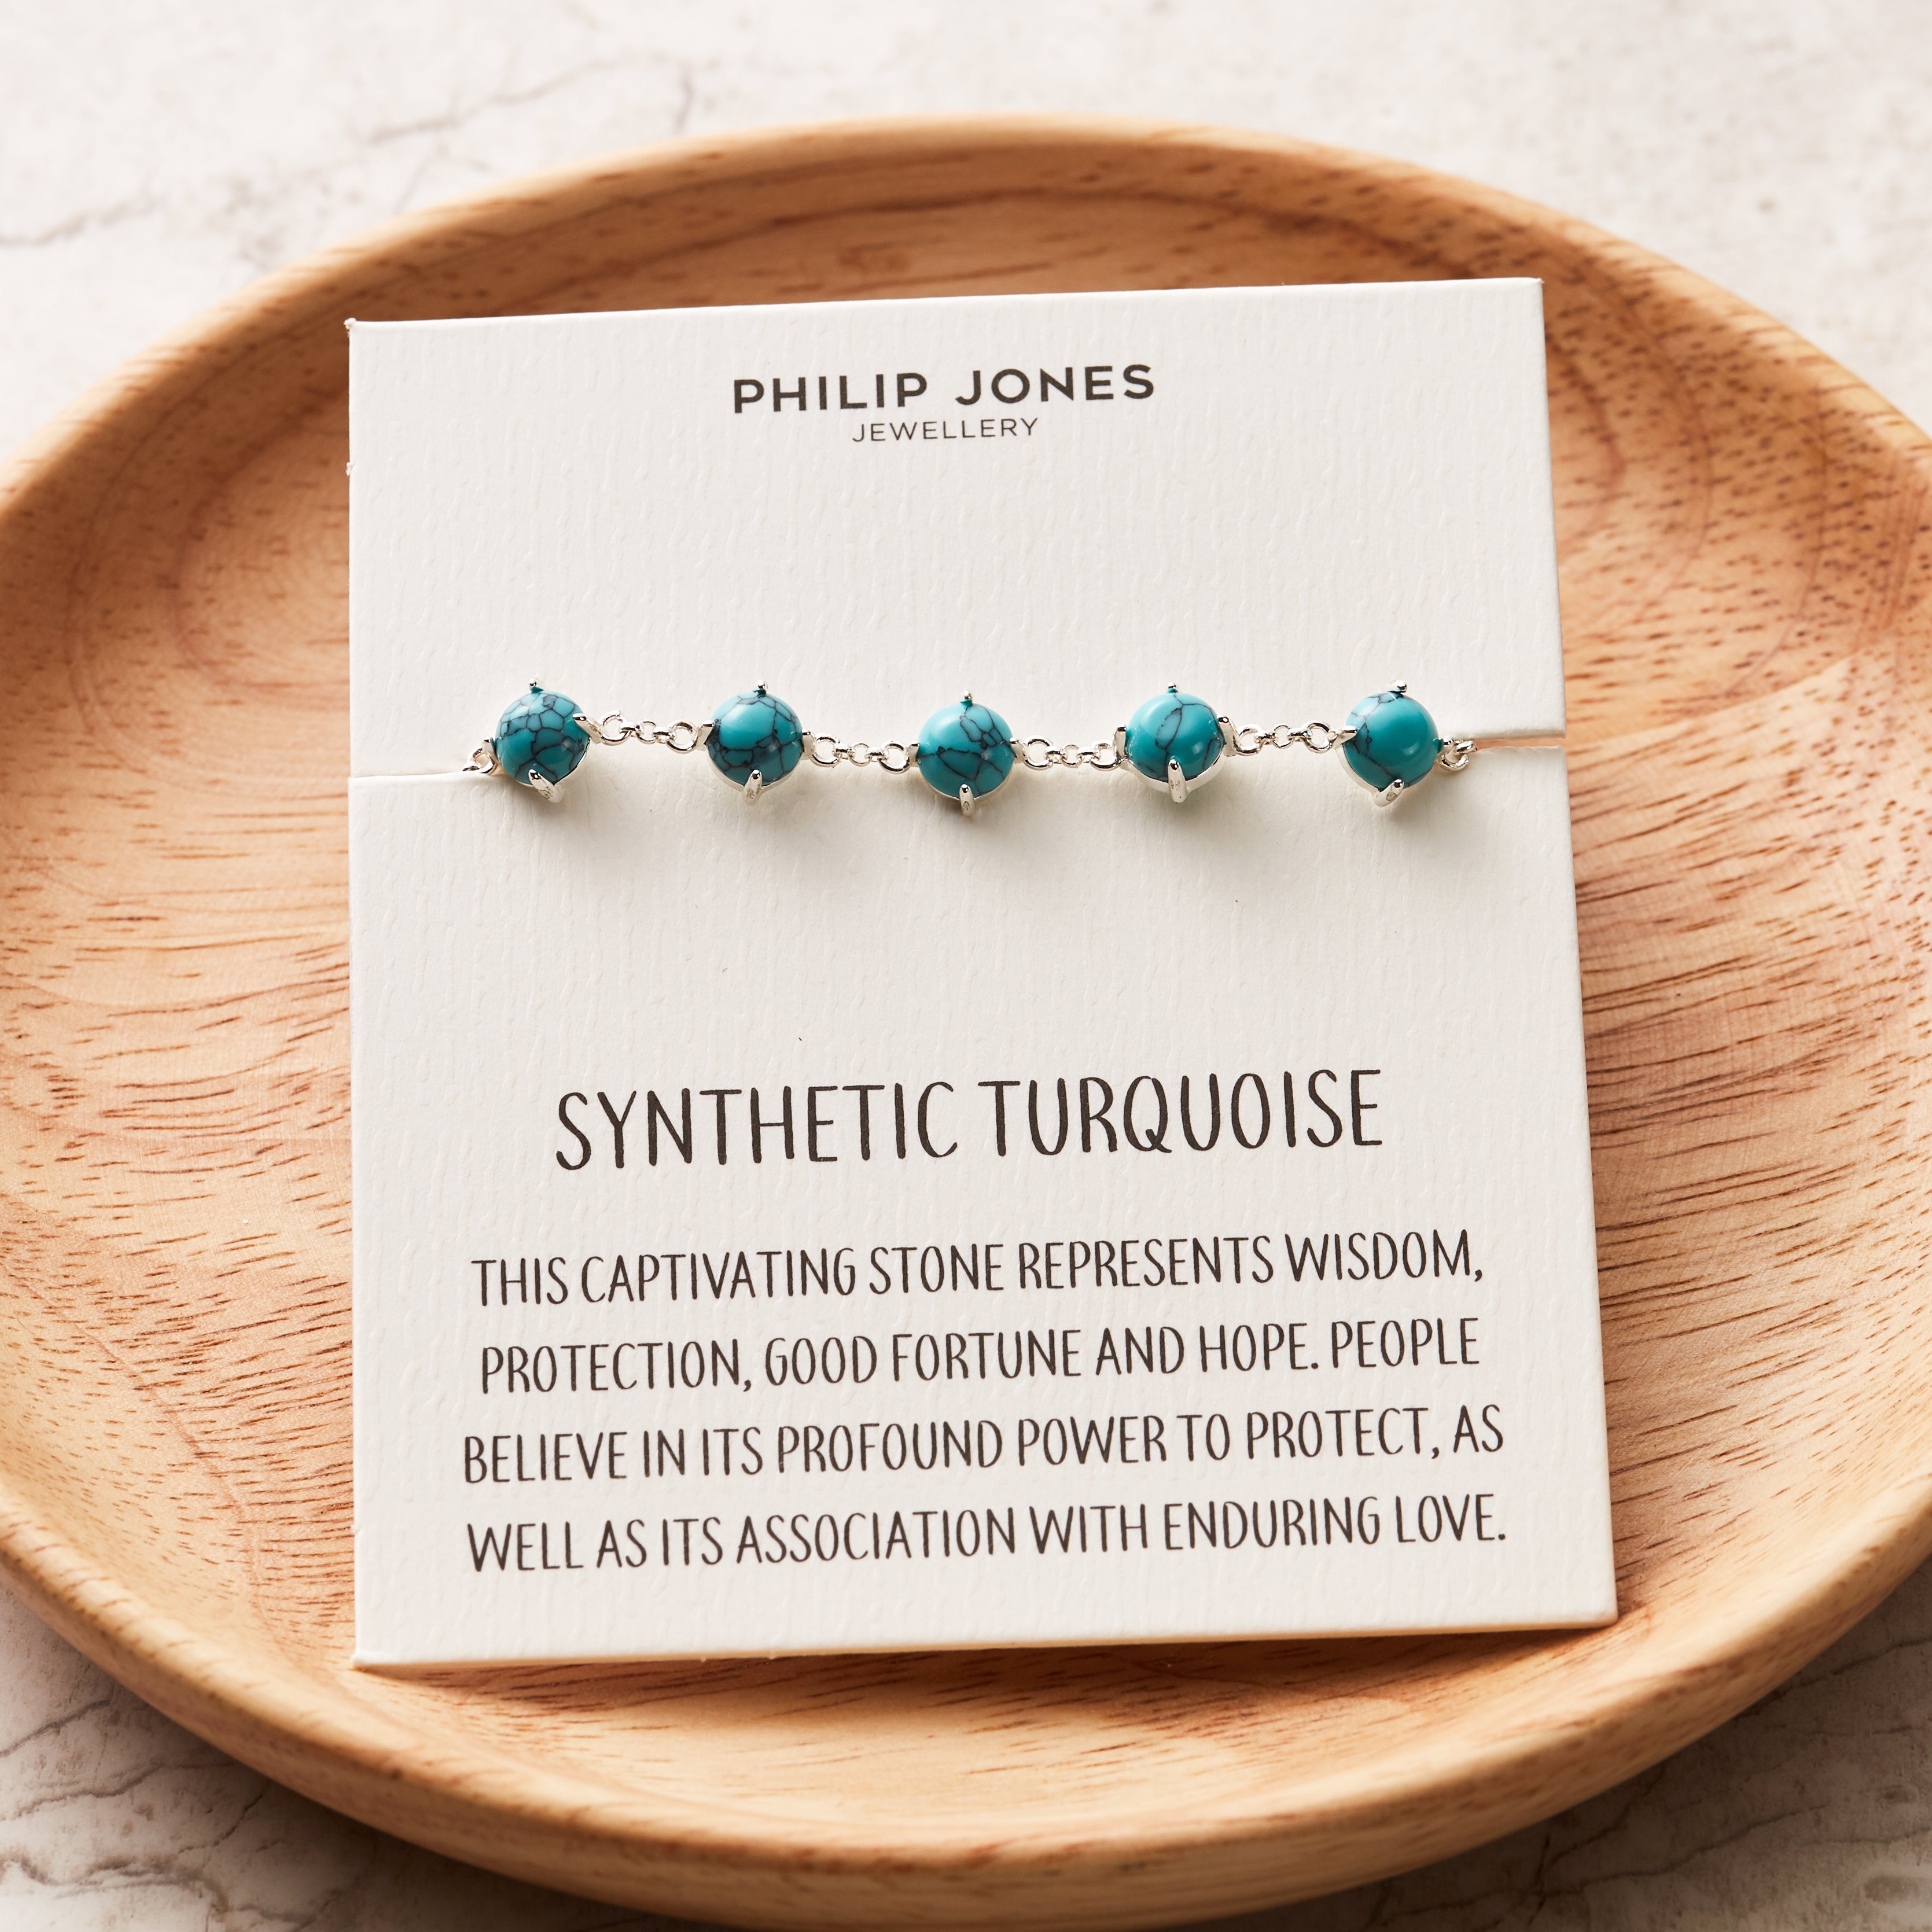 Synthetic Turquoise Gemstone Bracelet with Quote Card